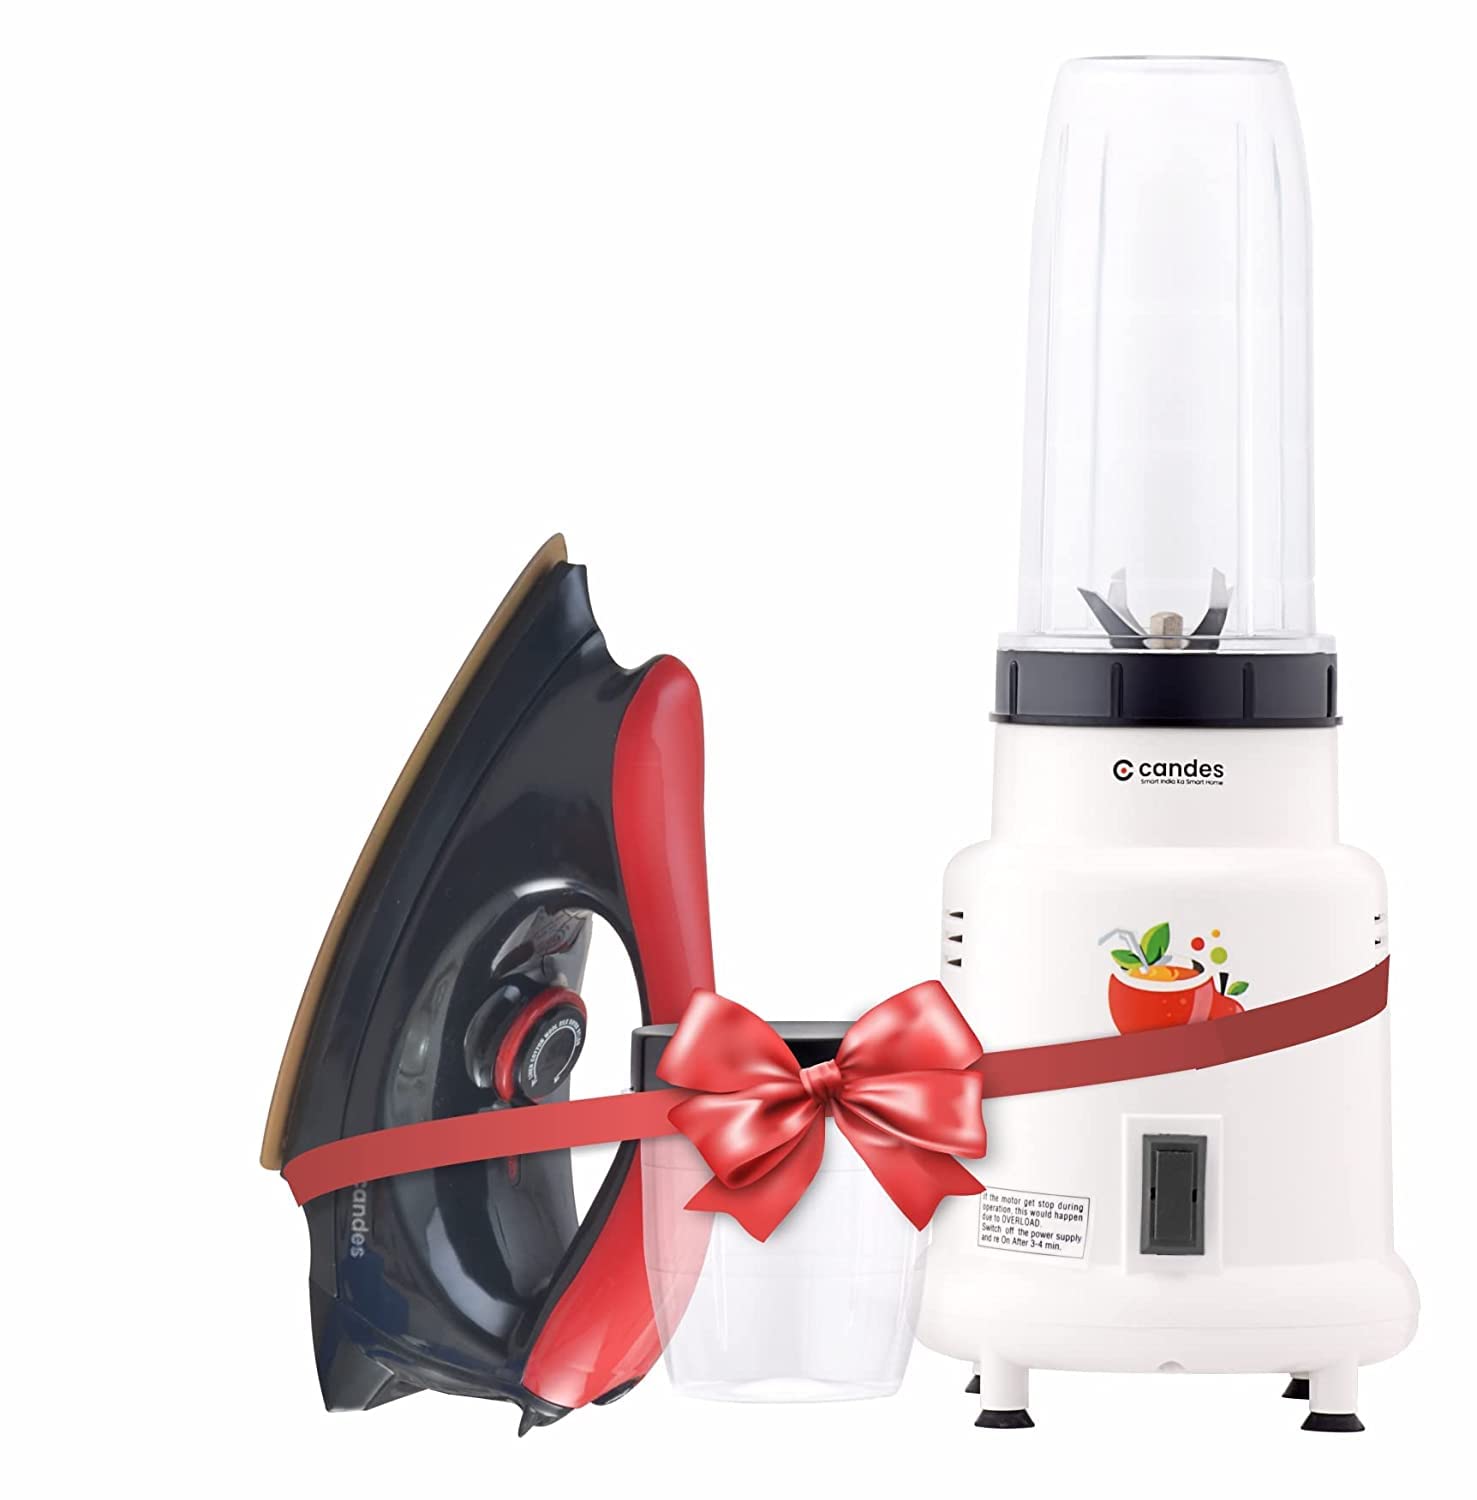 Candes Hector Nutri Blender 22000 RPM, Stainless Steel Blades, 2 Unbreakable Jars, 1 Years Warranty, 400-Watt, (White) & EI106 Electric Dry Iron (Super Combo)